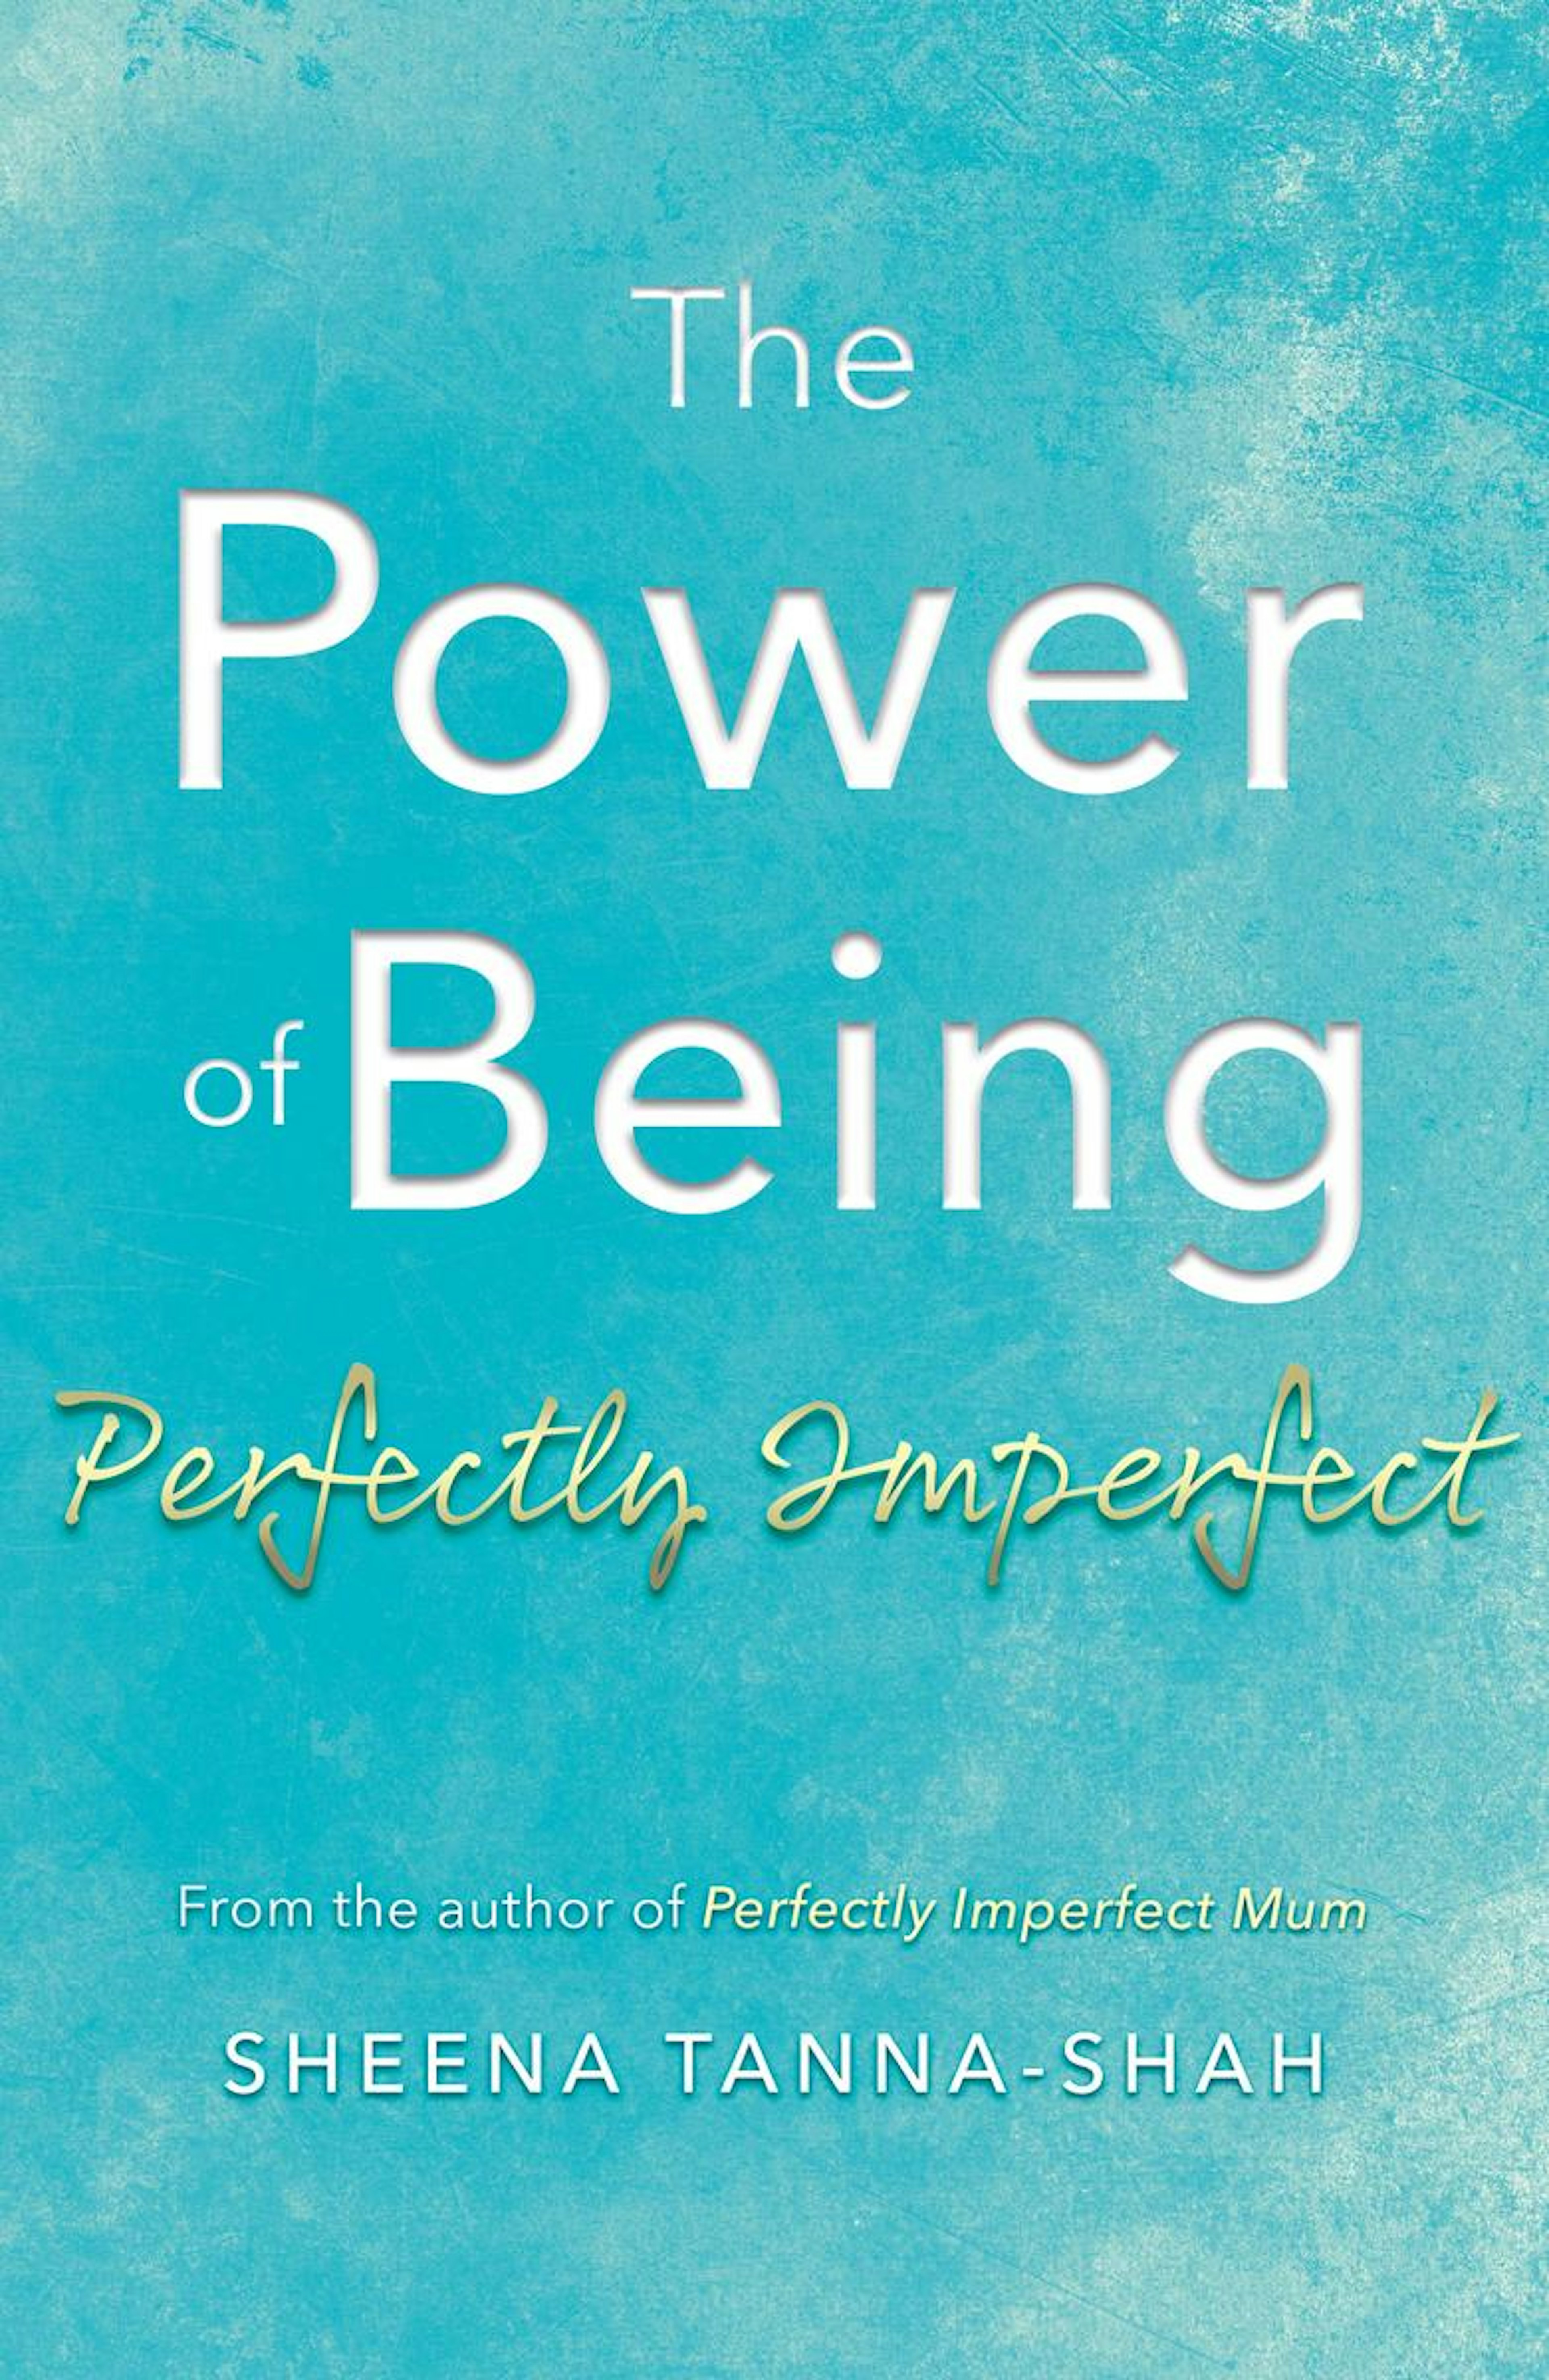 The Power of being Perfectly Imperfect